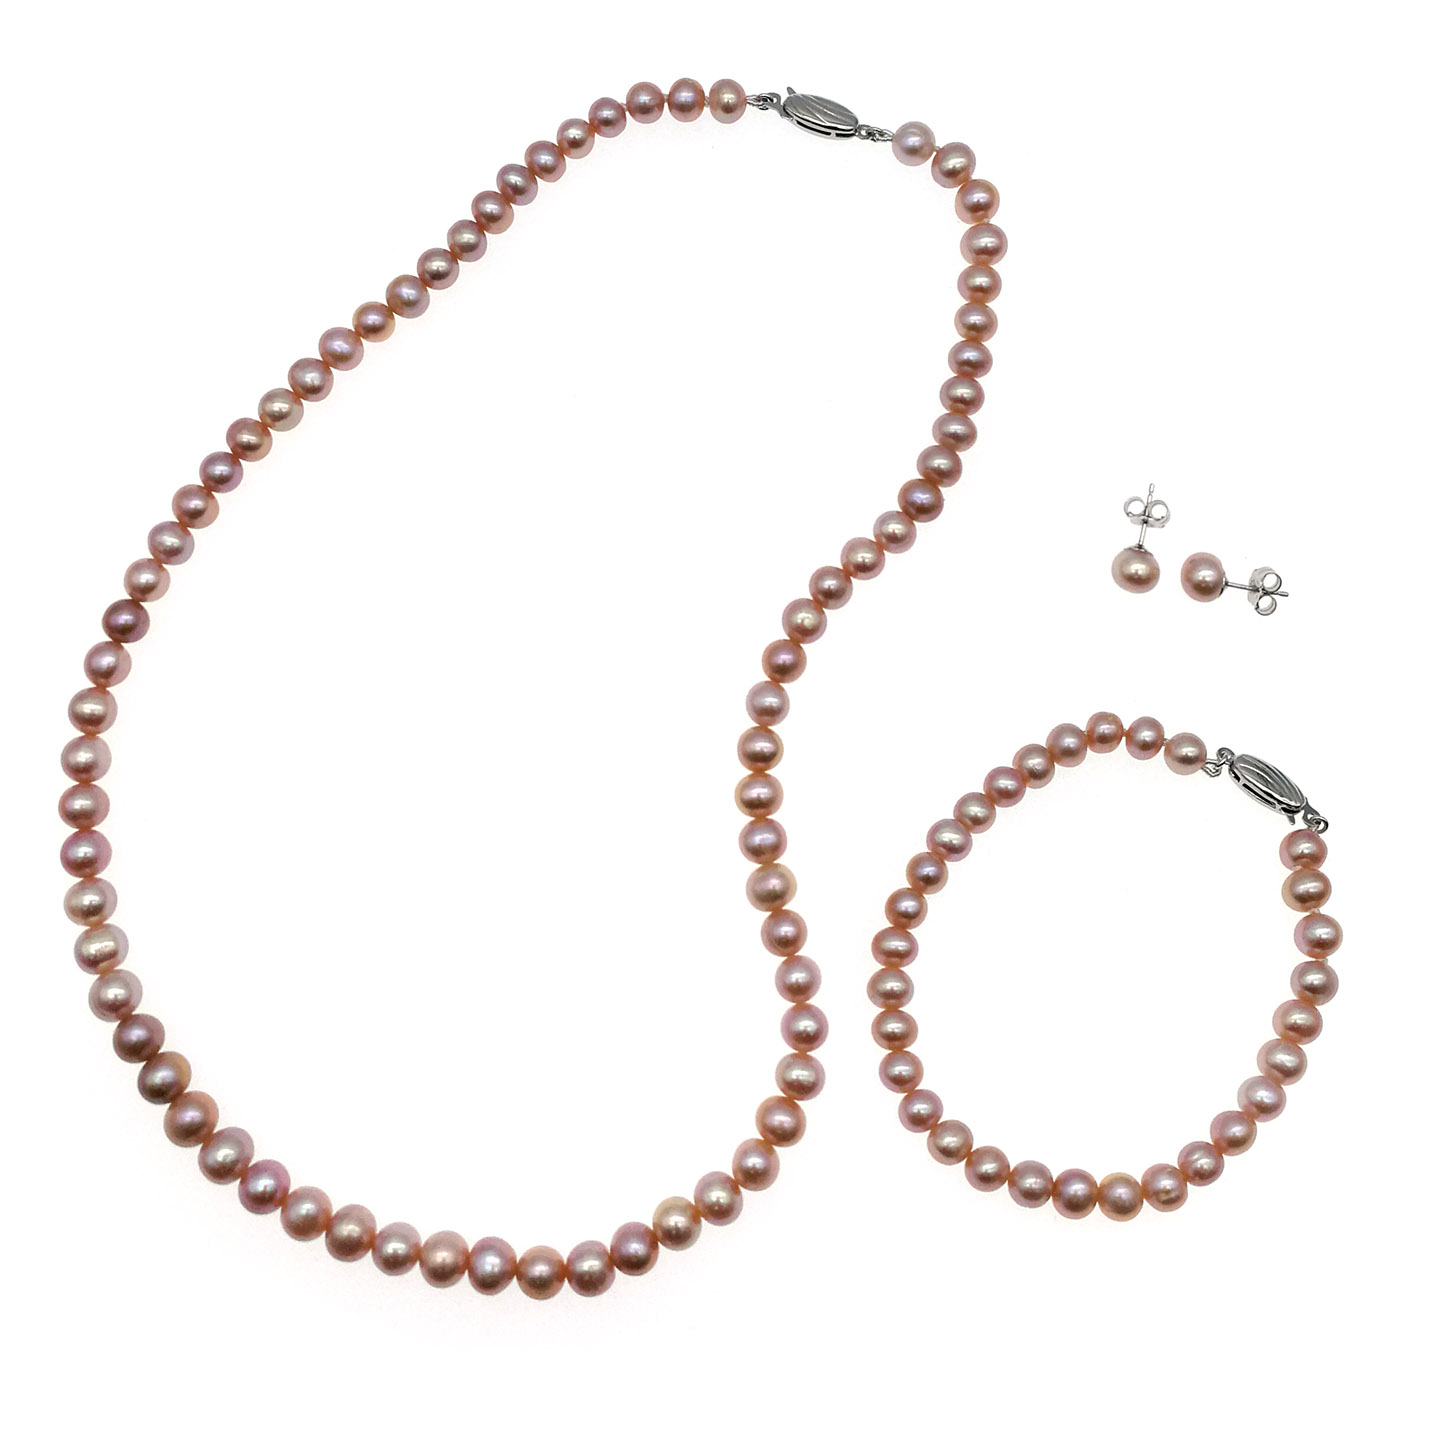 6-7mm Freshwater Pearl with 925 Silver Necklace, Bracelet & Earring Set